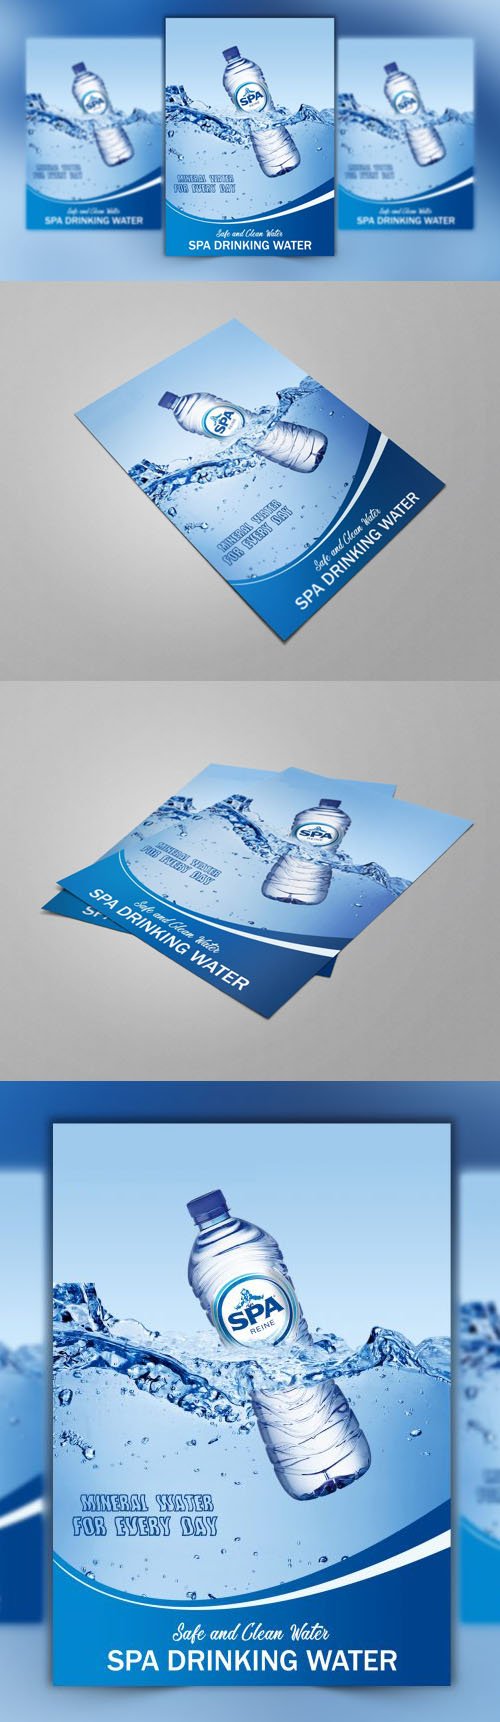 Water Company Flyer PSD Design Template